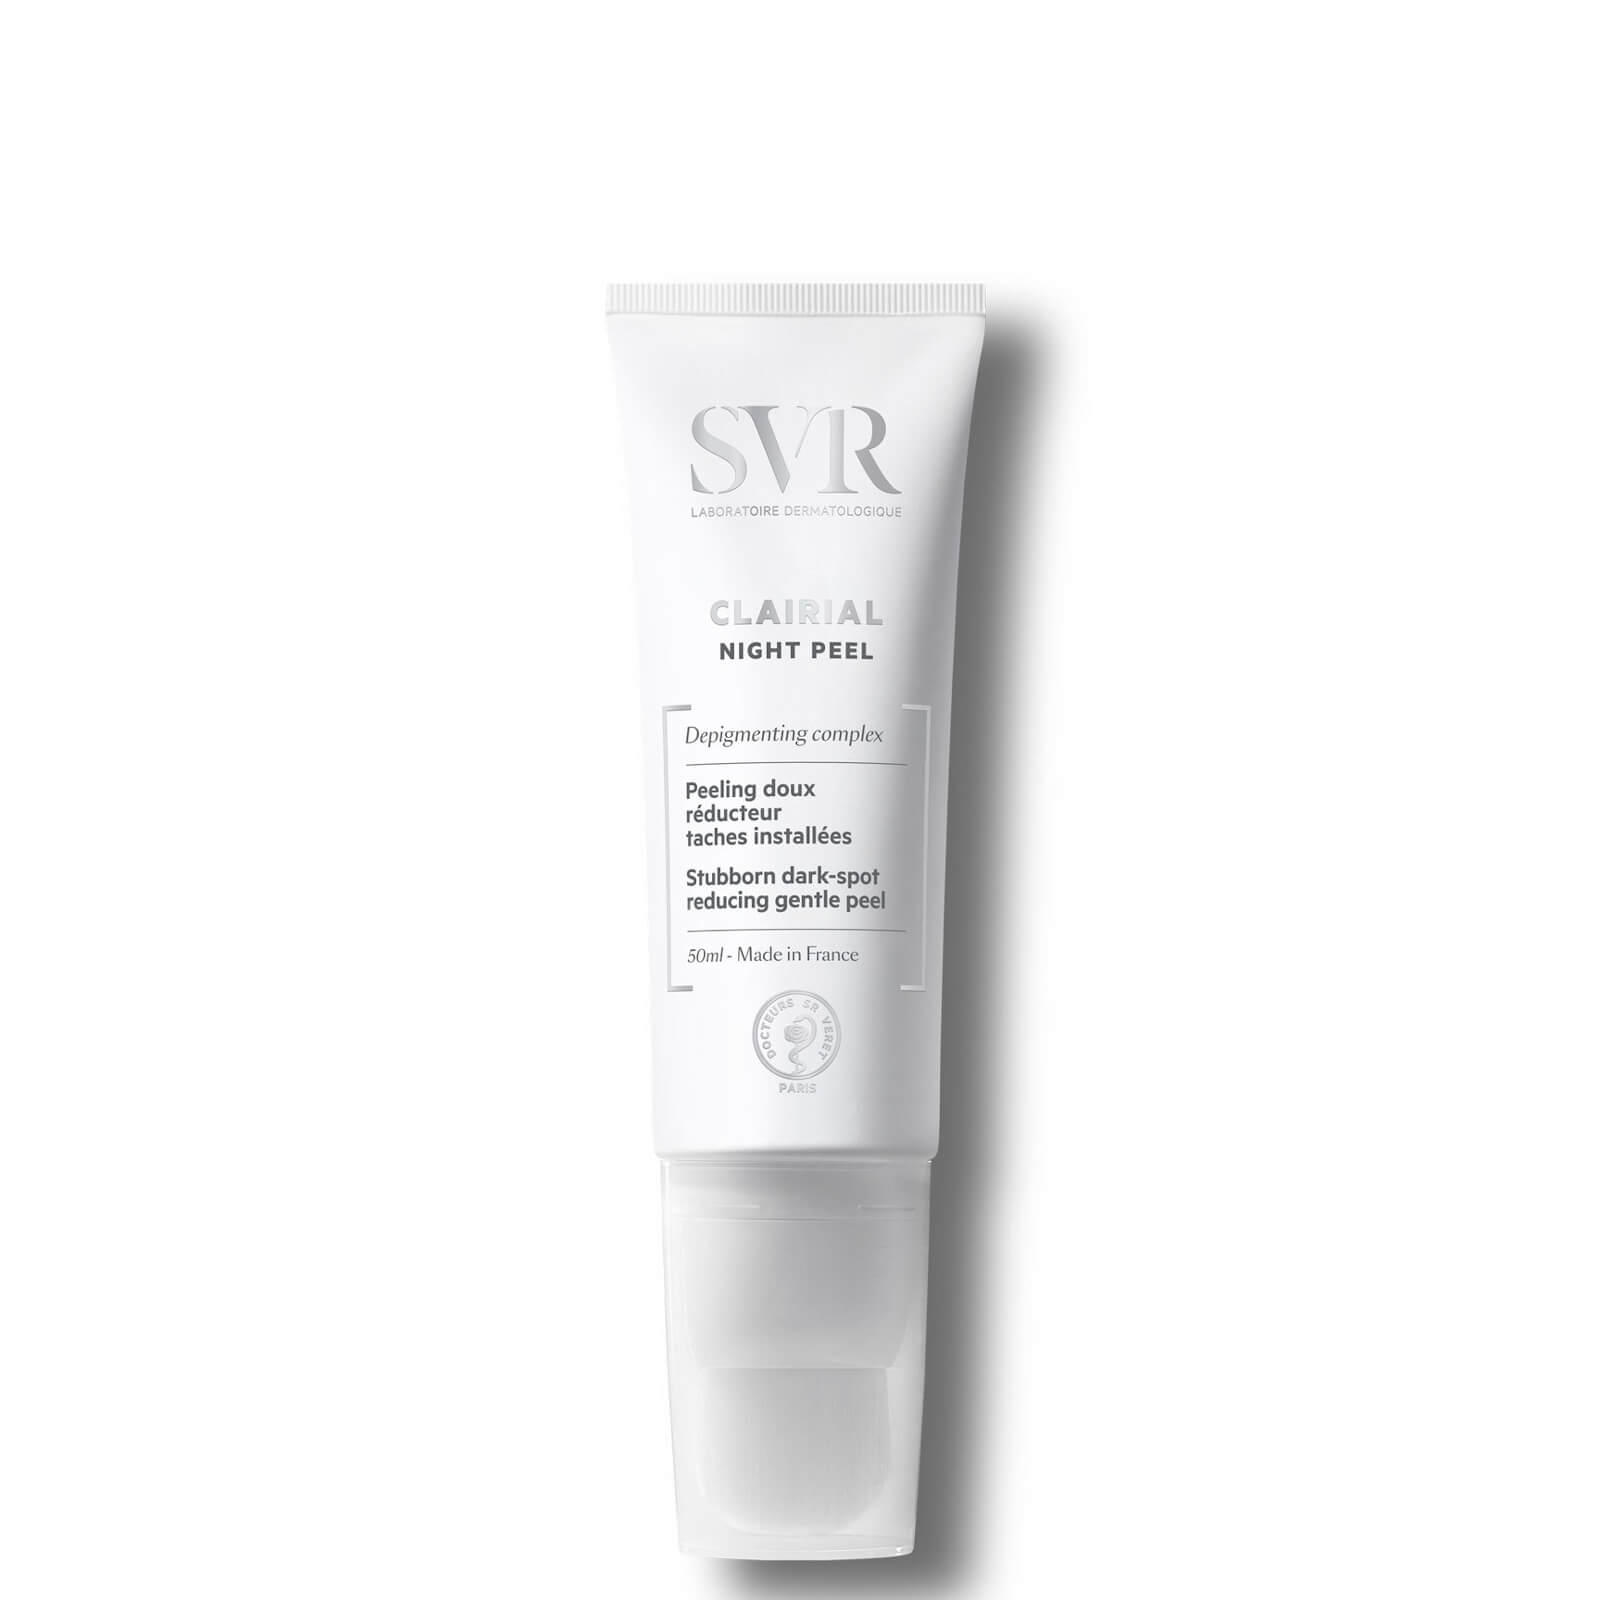 Photos - Facial / Body Cleansing Product SVR Clairial Night Peel Pigmentation Mark Exfoliator with Brush Applicator 